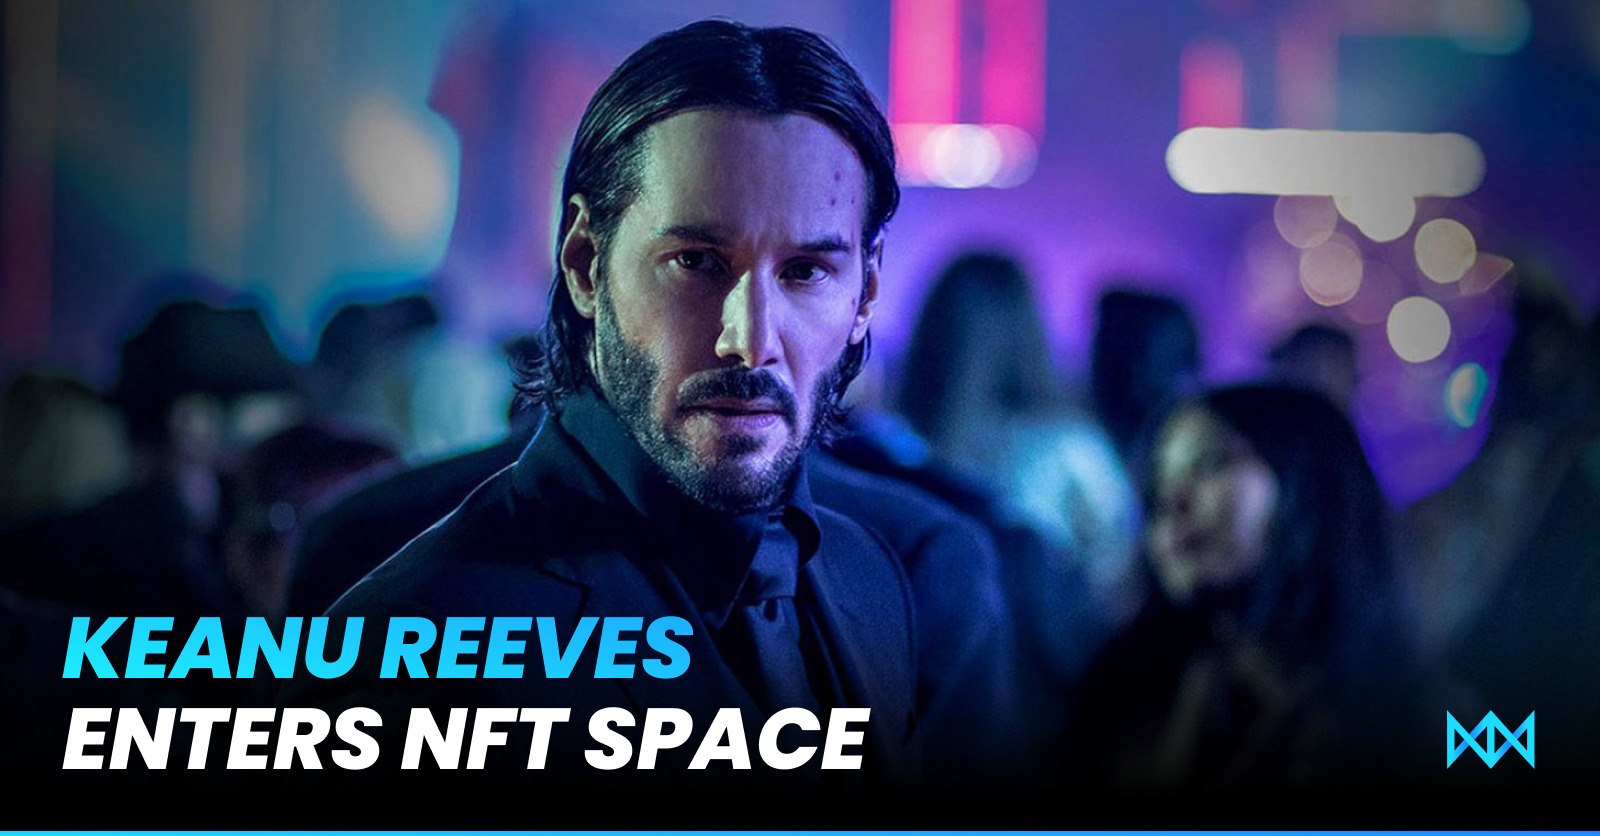 Keanu Reeves Wants to Make NFTs More Inclusive